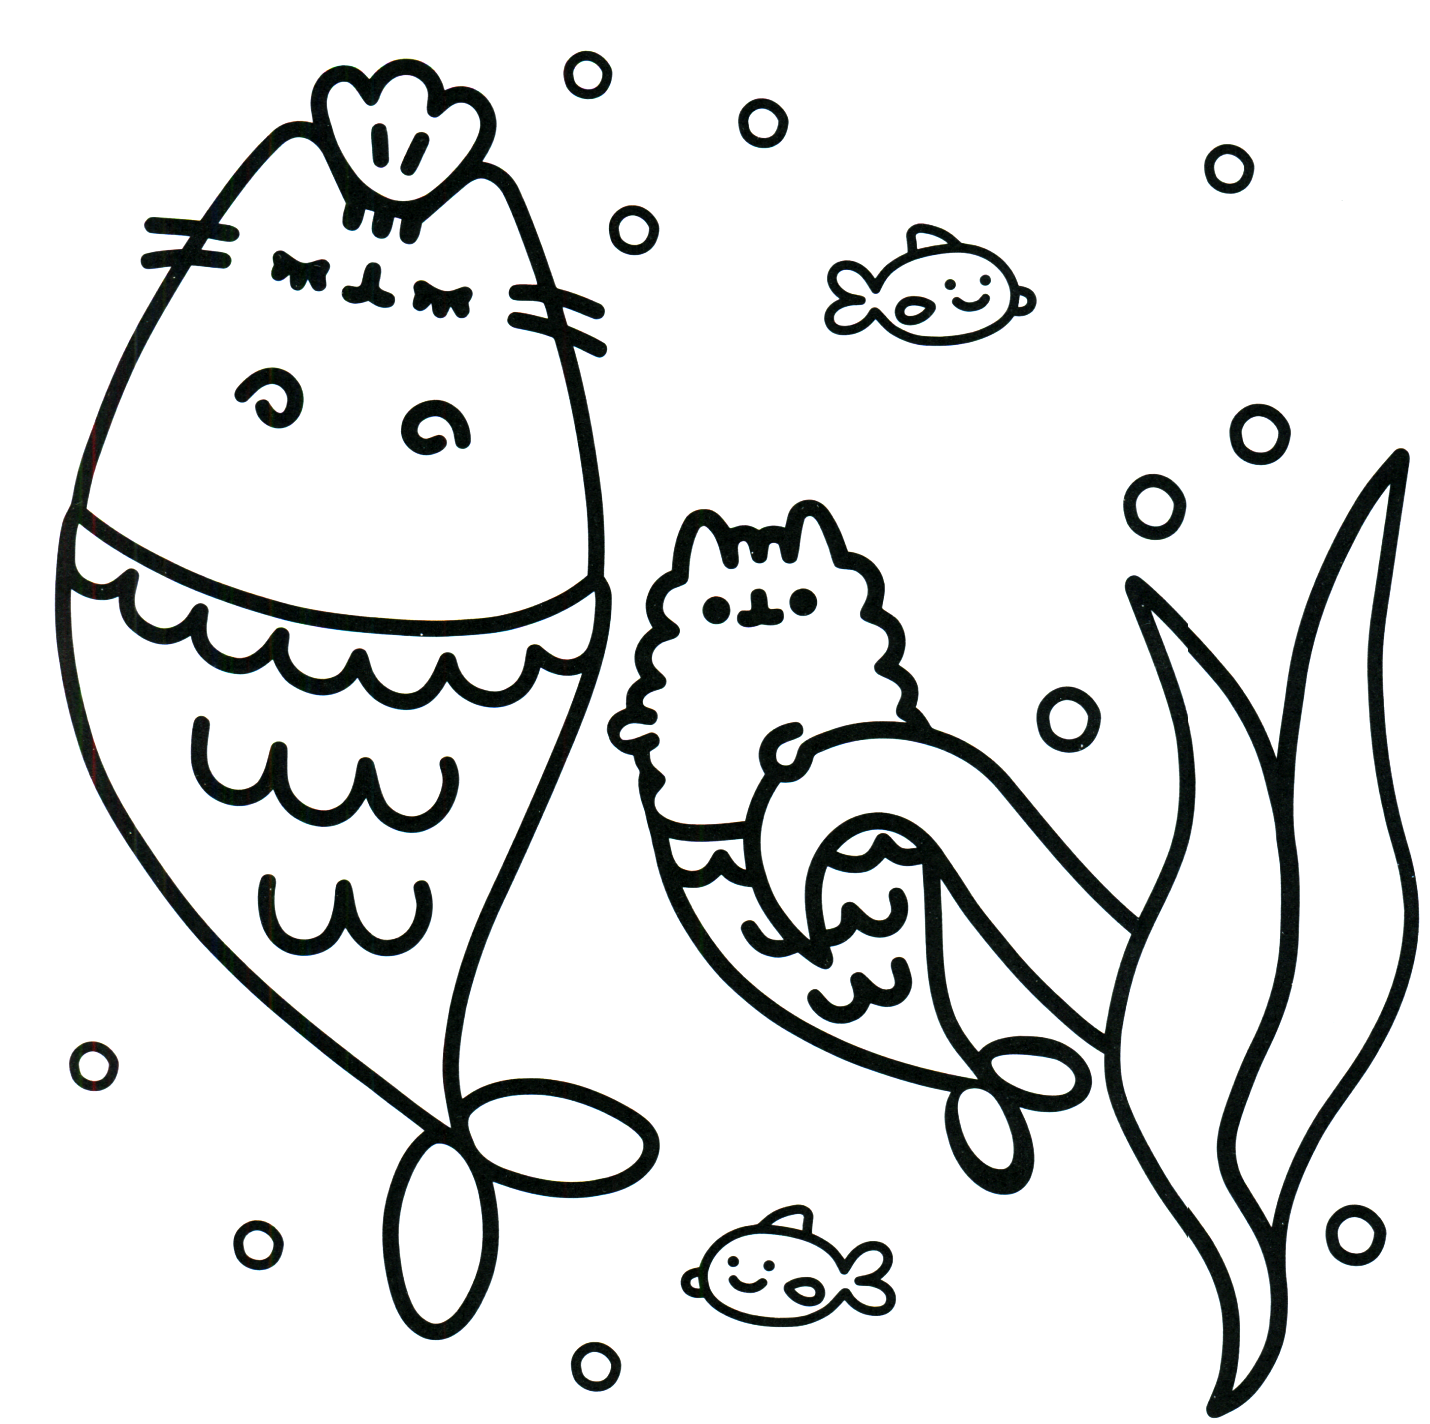 pusheen-coloring-pages-best-coloring-pages-for-kids